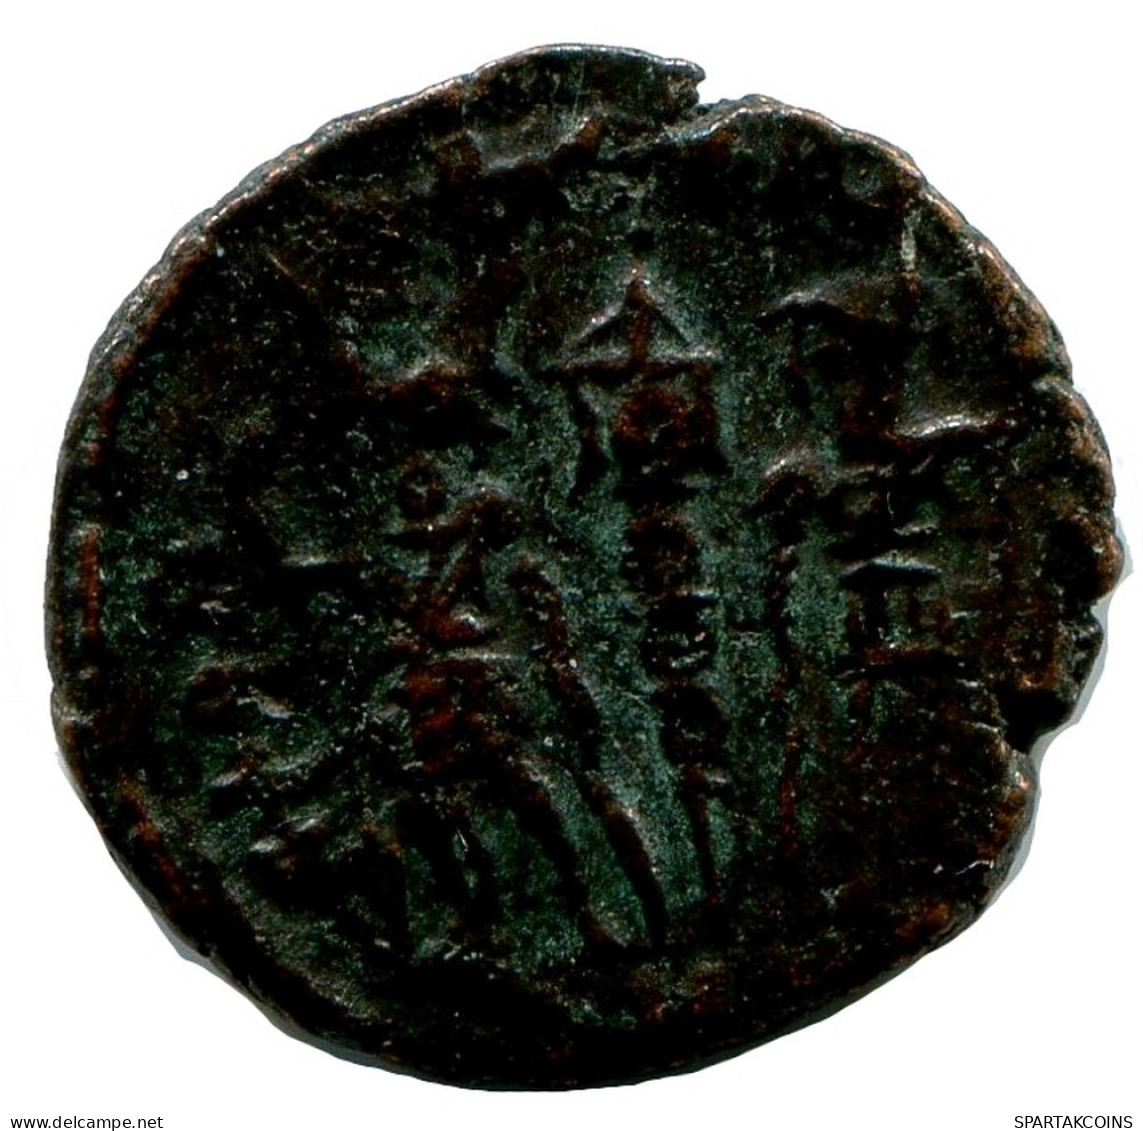 CONSTANTIUS II MINT UNCERTAIN FOUND IN IHNASYAH HOARD EGYPT #ANC10122.14.U.A - The Christian Empire (307 AD To 363 AD)